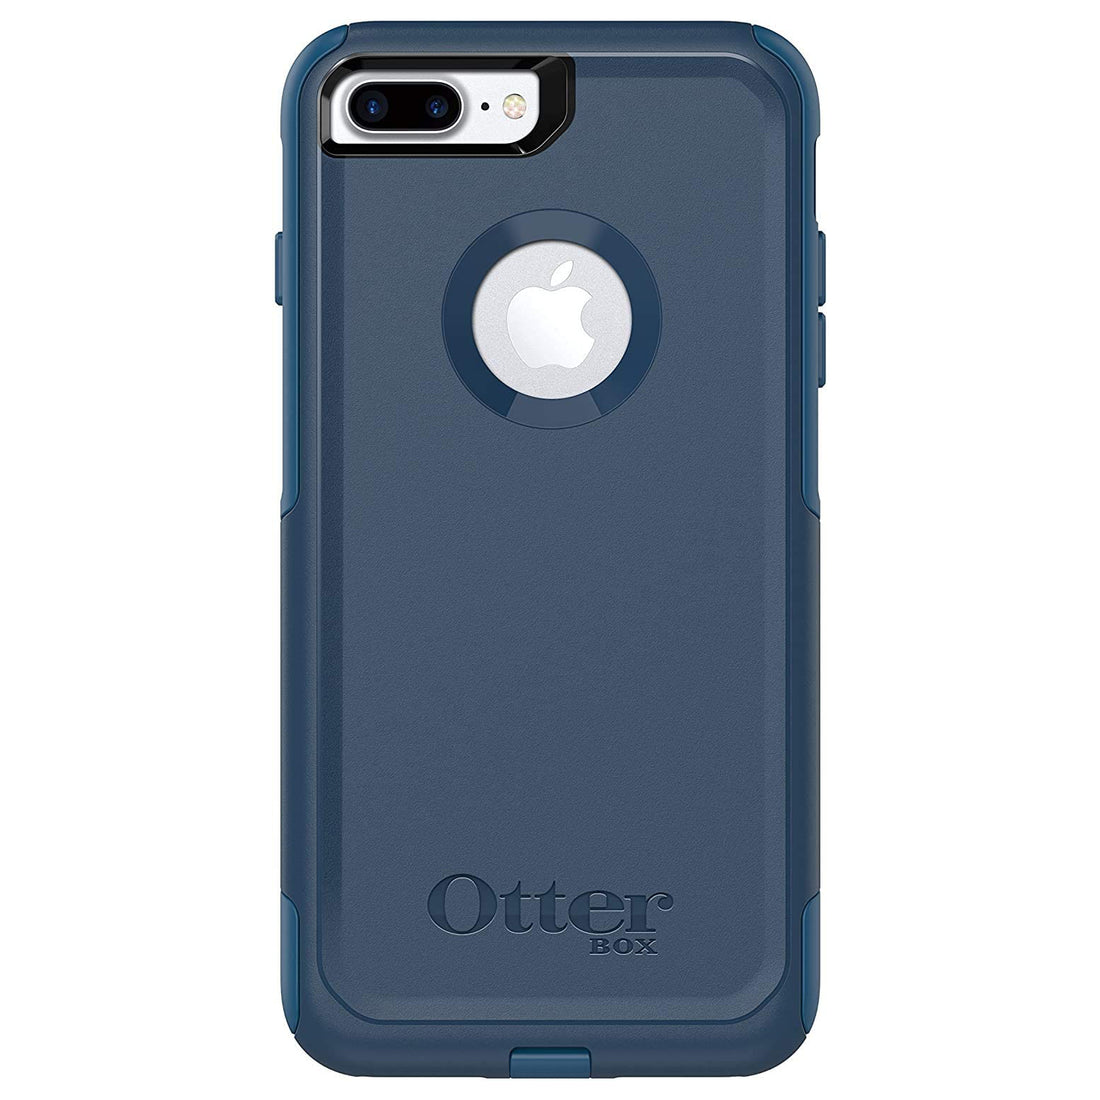 OtterBox COMMUTER SERIES Case for iPhone 8 Plus / iPhone 7 Plus - Bespoke Way (Certified Refurbished)